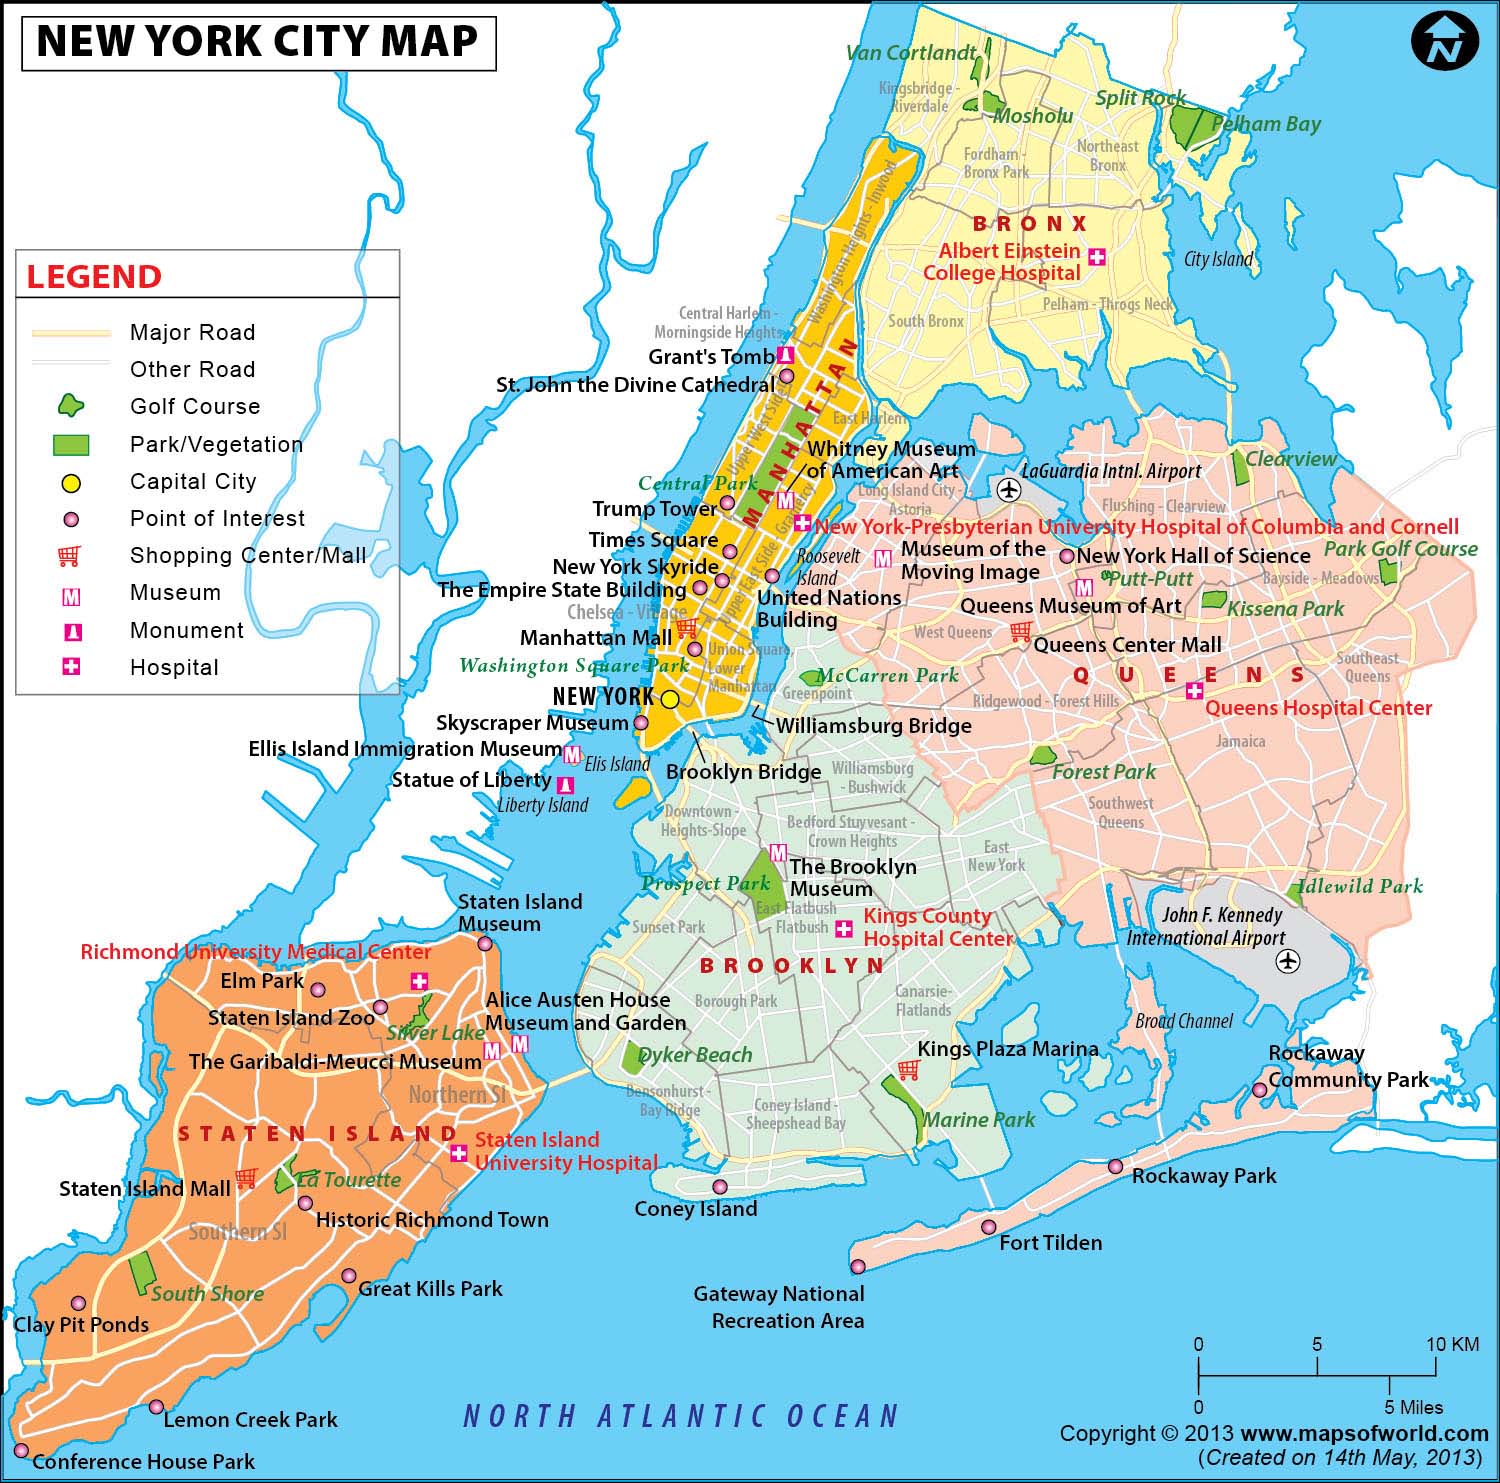 NYC Map, Map of New York City, Information and Facts of New York City